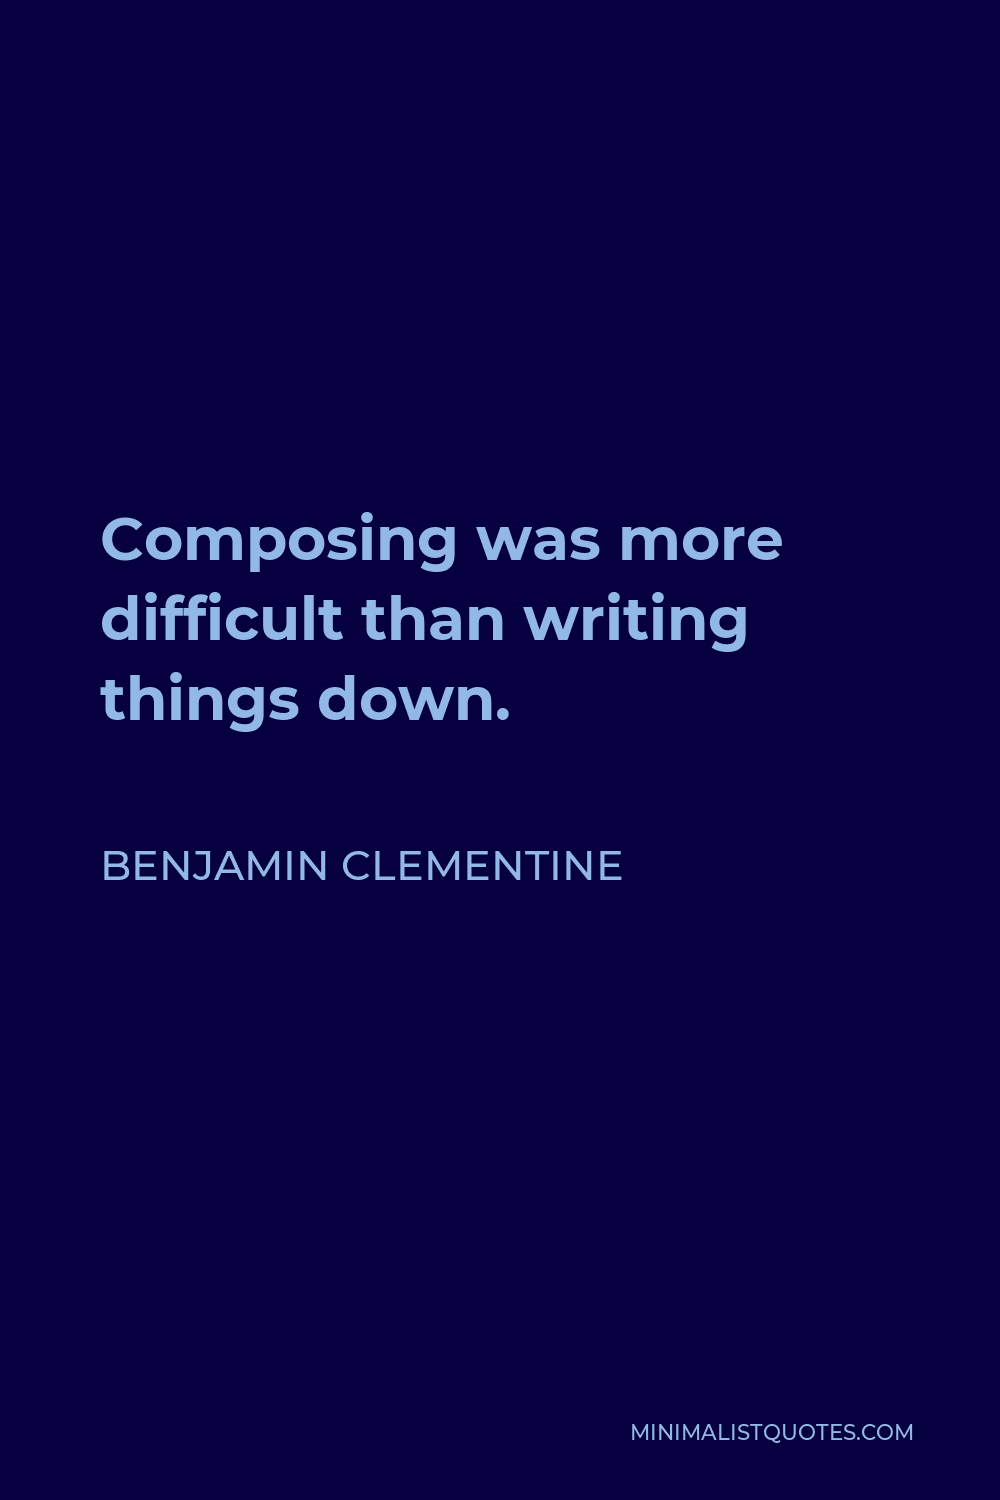 Benjamin Clementine Quote - Composing was more difficult than writing things down.